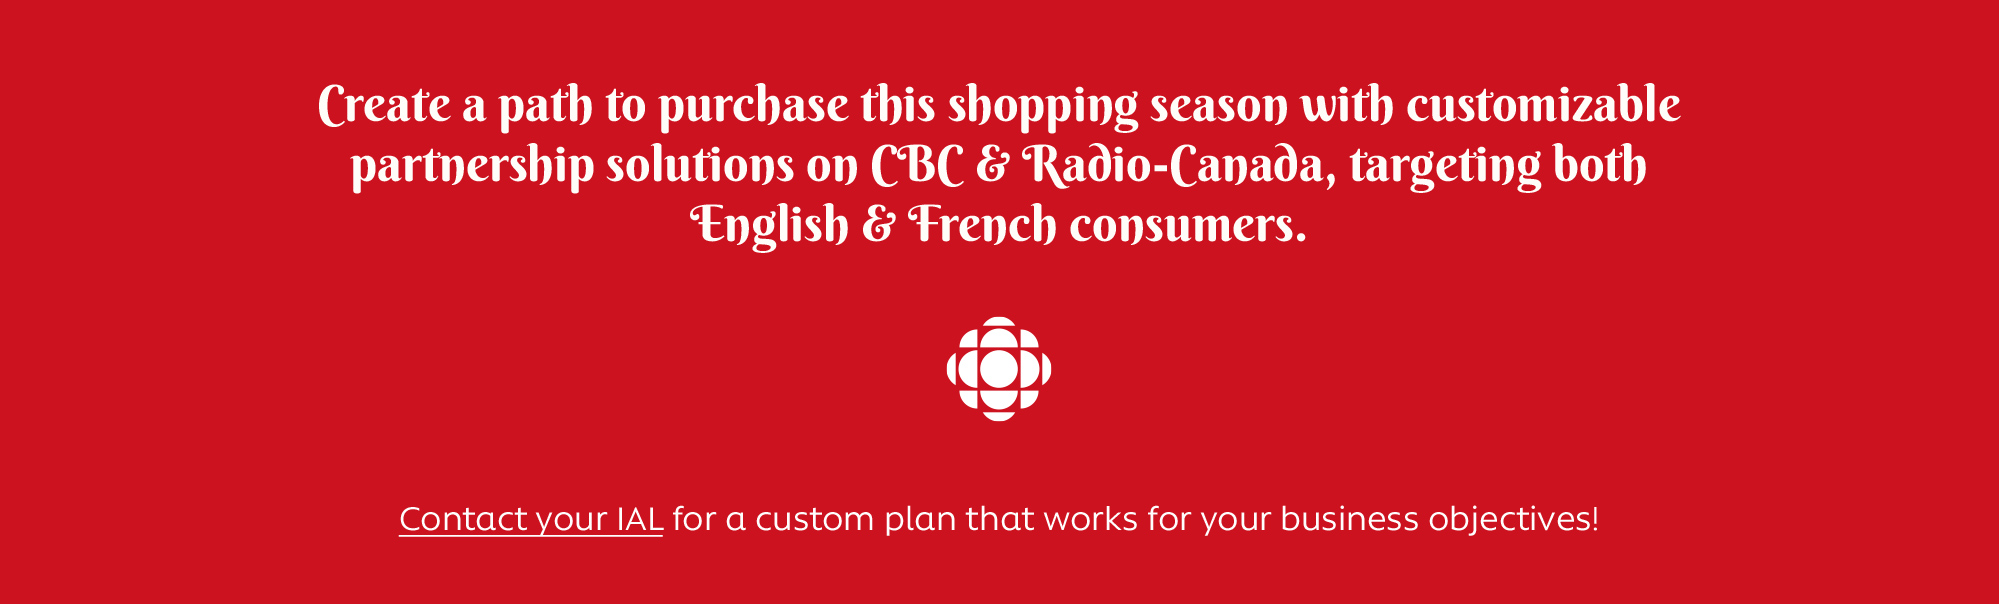 Create a path to purchase this shopping season with customizable partnership solutions on CBC & Radio-Canada, targeting both English & French consumers.